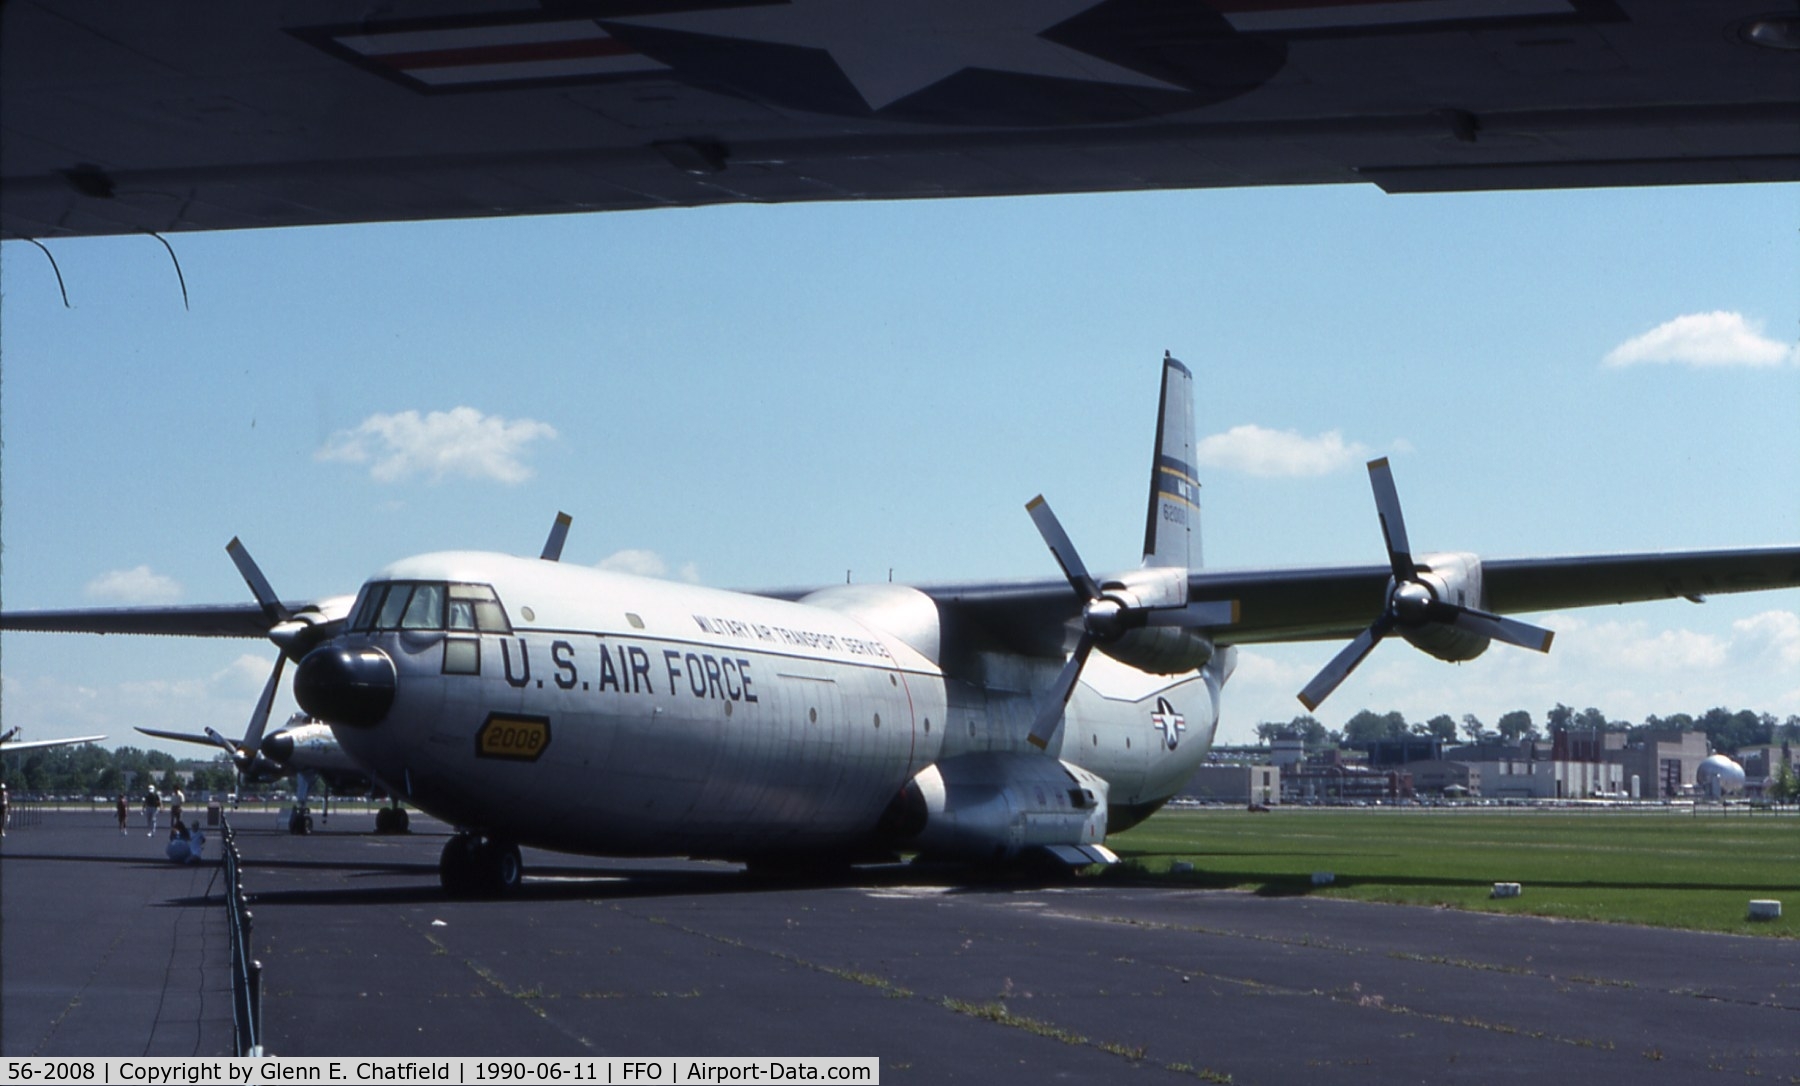 56-2008, 1956 Douglas C-133A-25-DL Cargomaster C/N 45245, C-133A at the National Museum of the U.S. Air Force